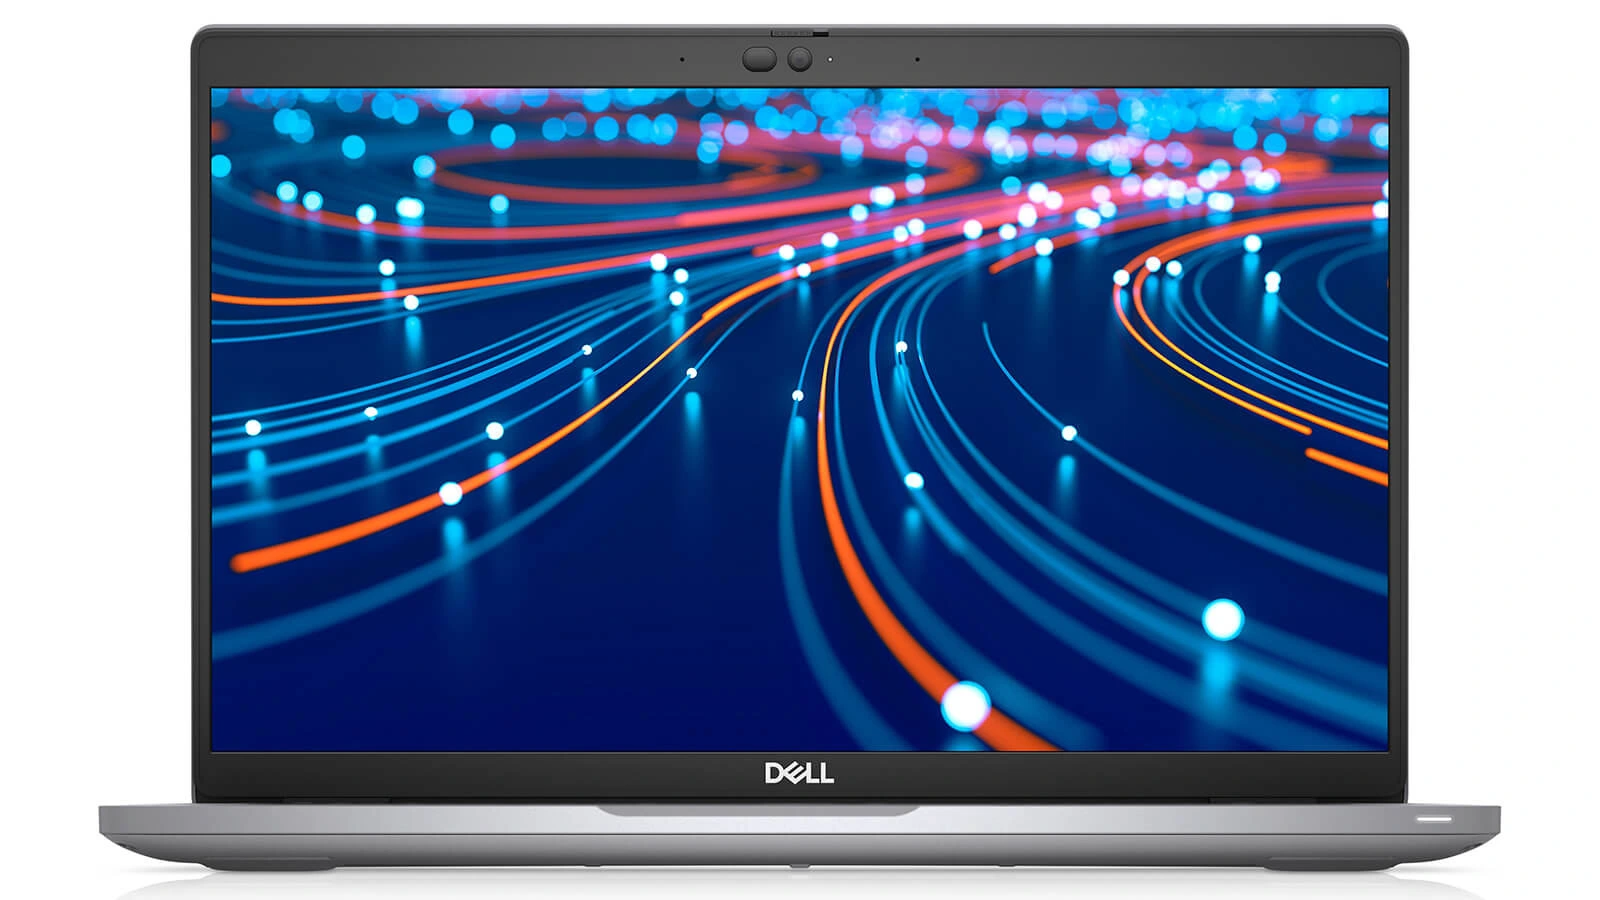 Dell Latitude 5420 Features 02